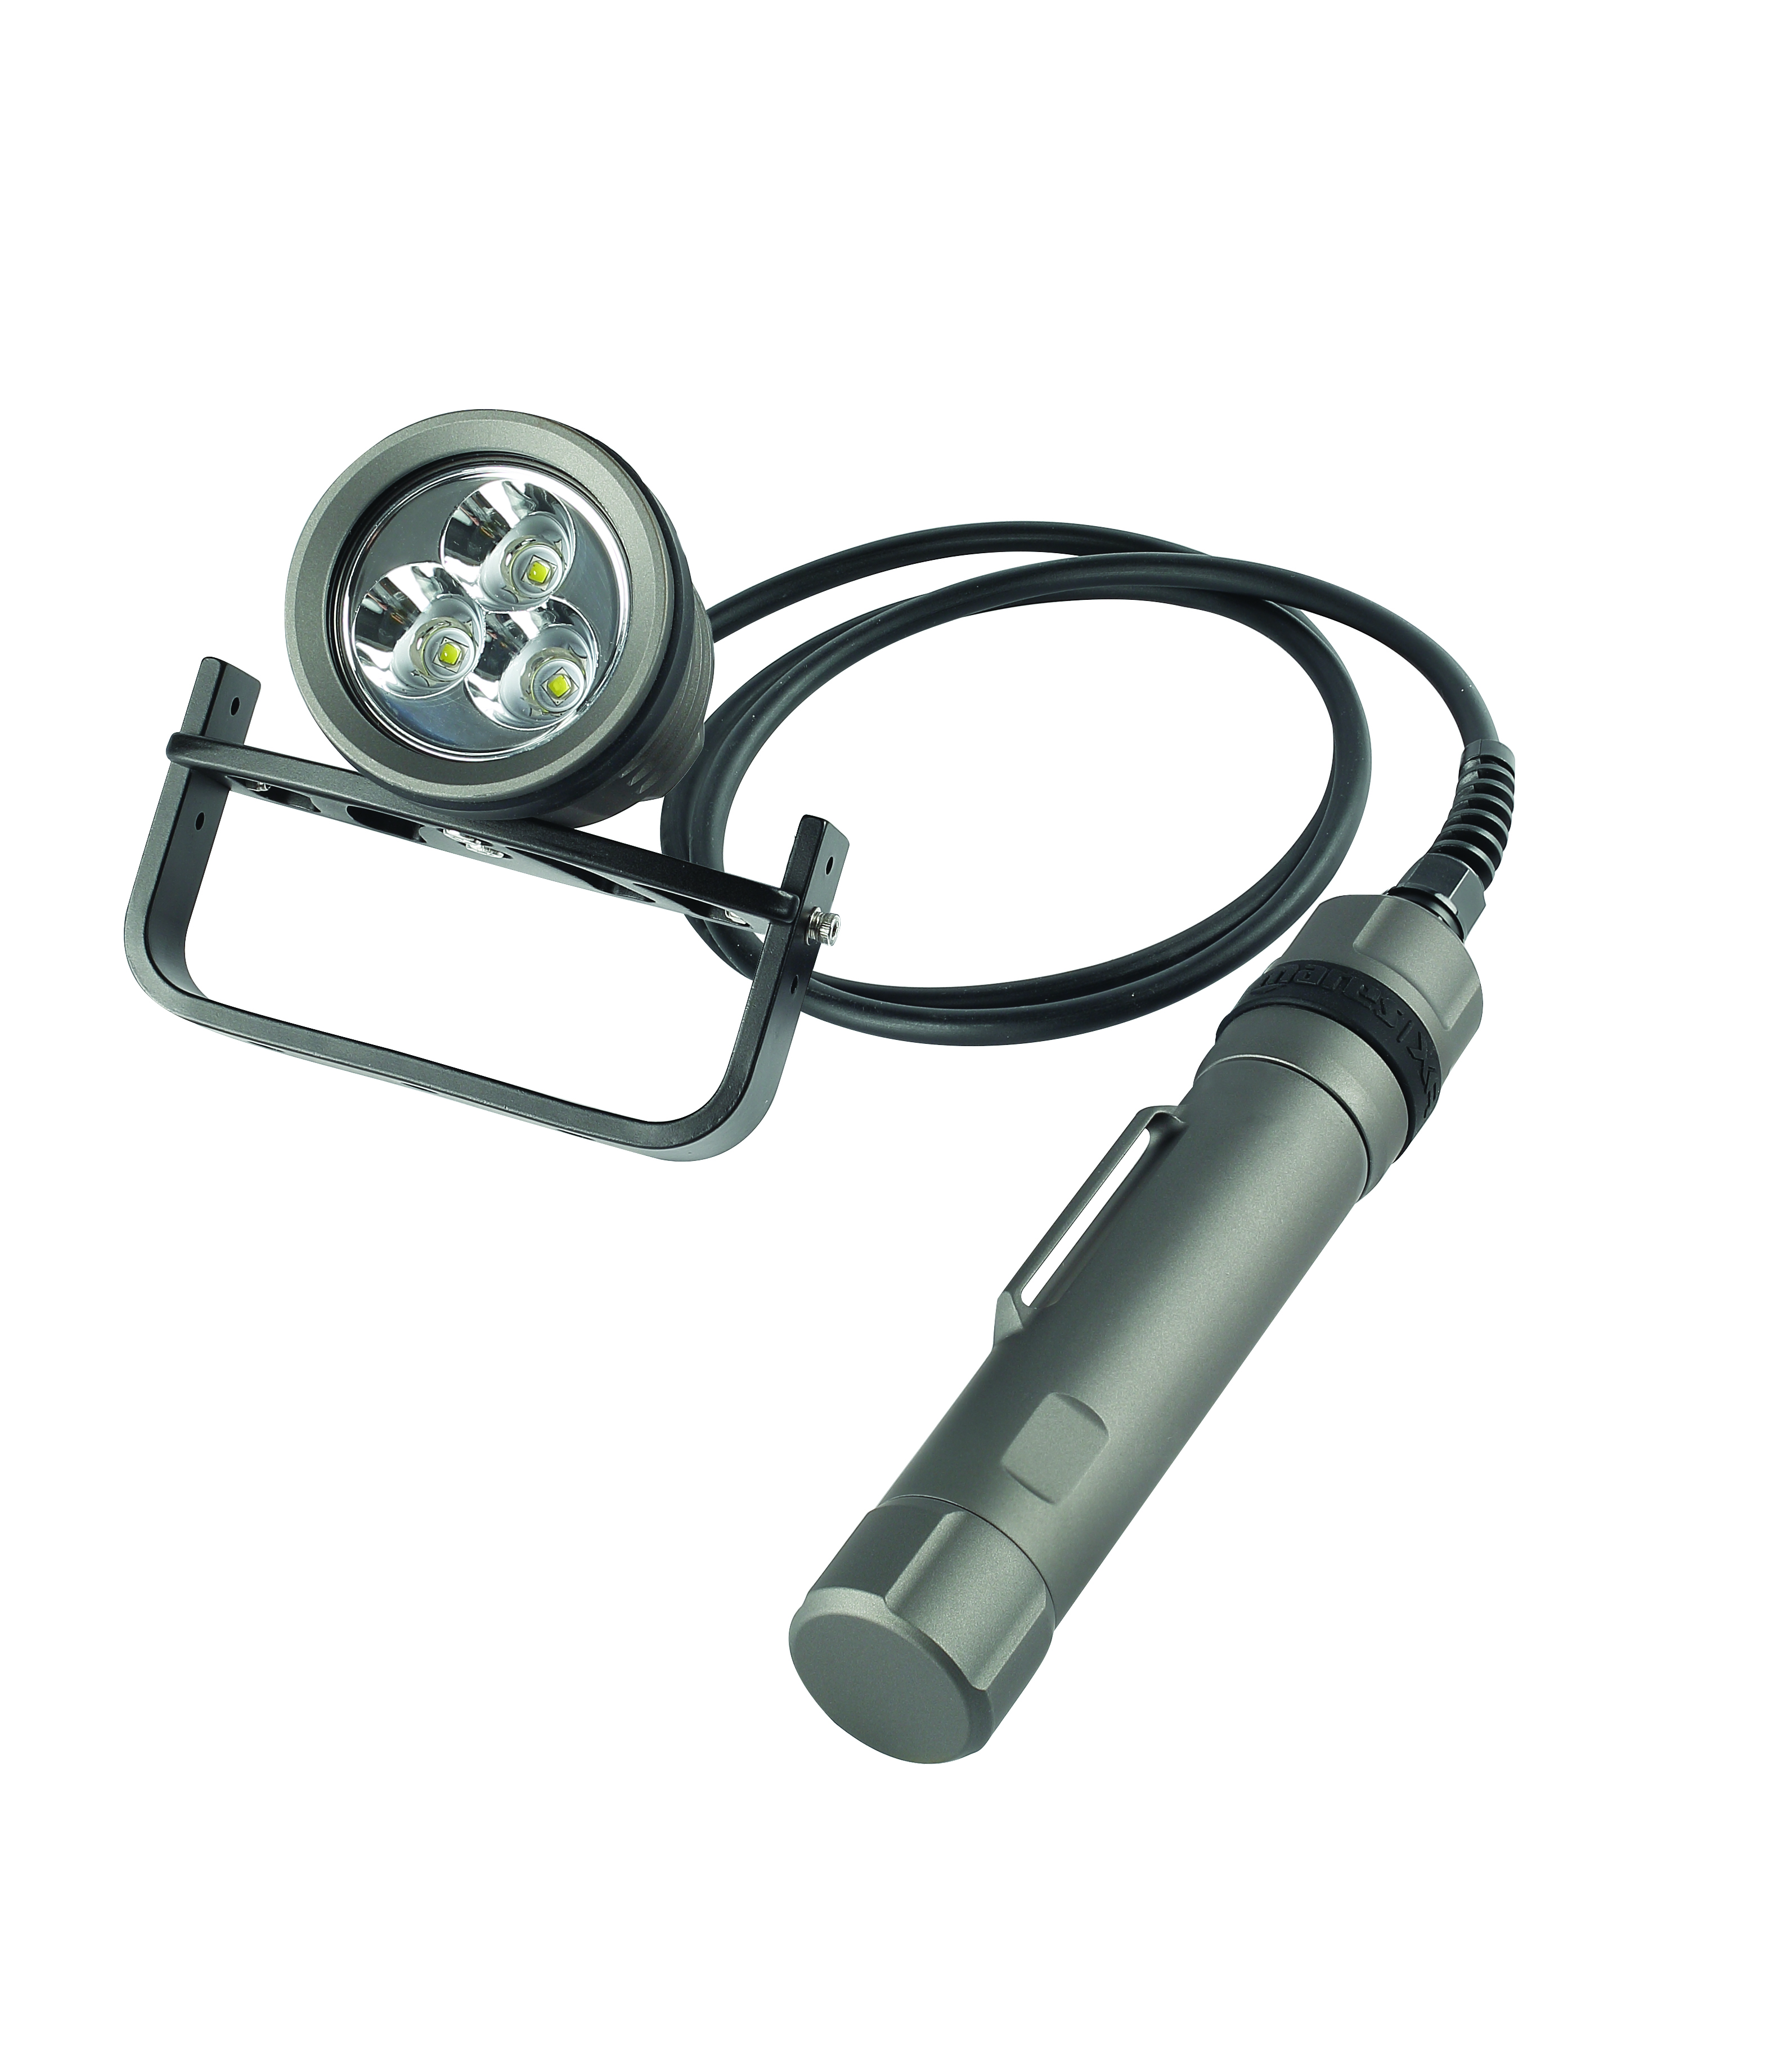 Mares DCTS Canister Light